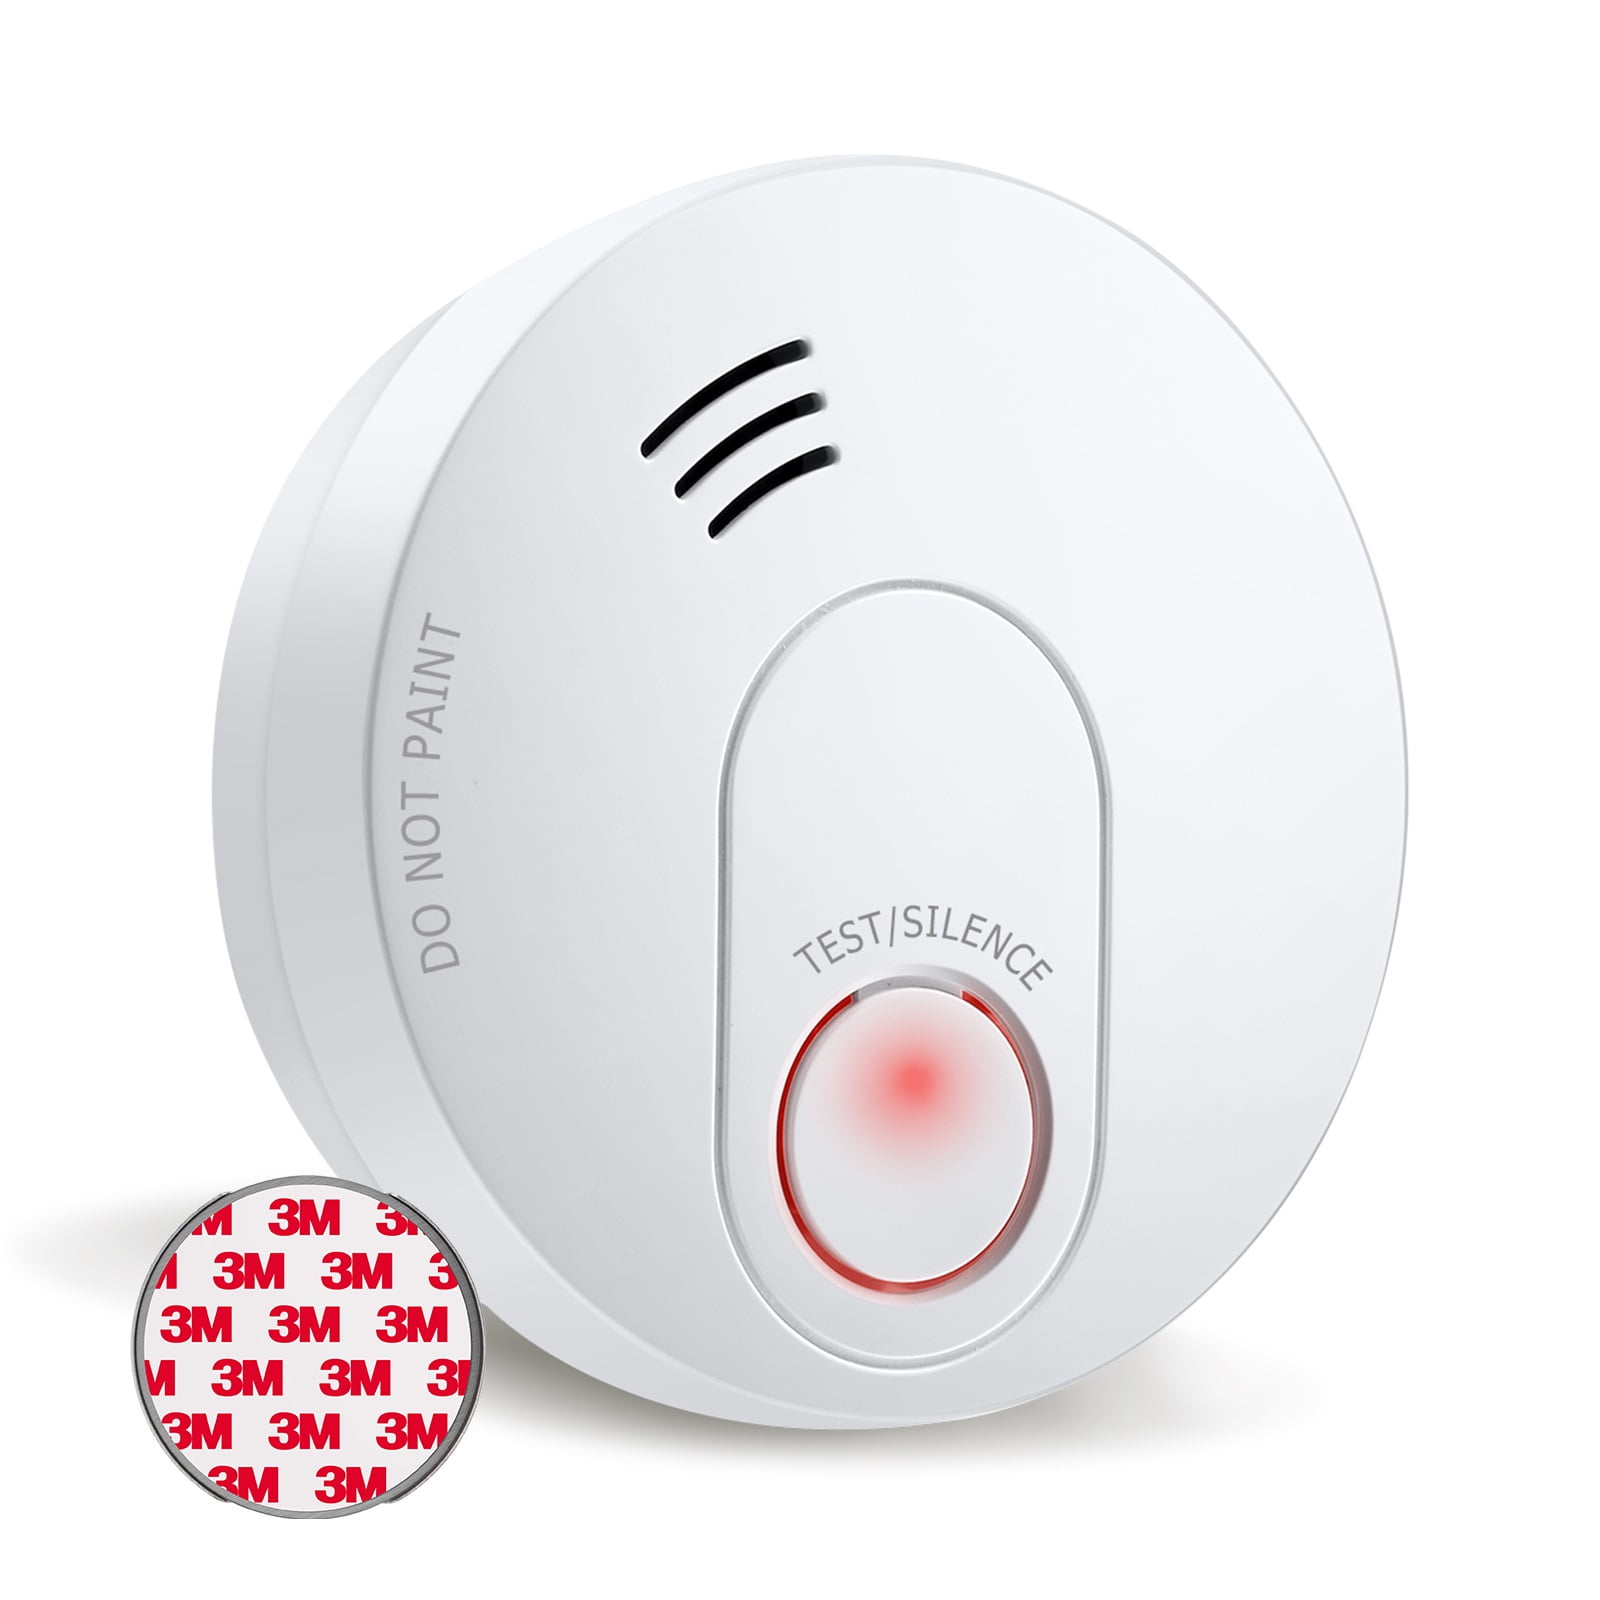 Details about   Hallway Smoke Alarm Detector Sealed Lithium Battery Power With Safety Light 